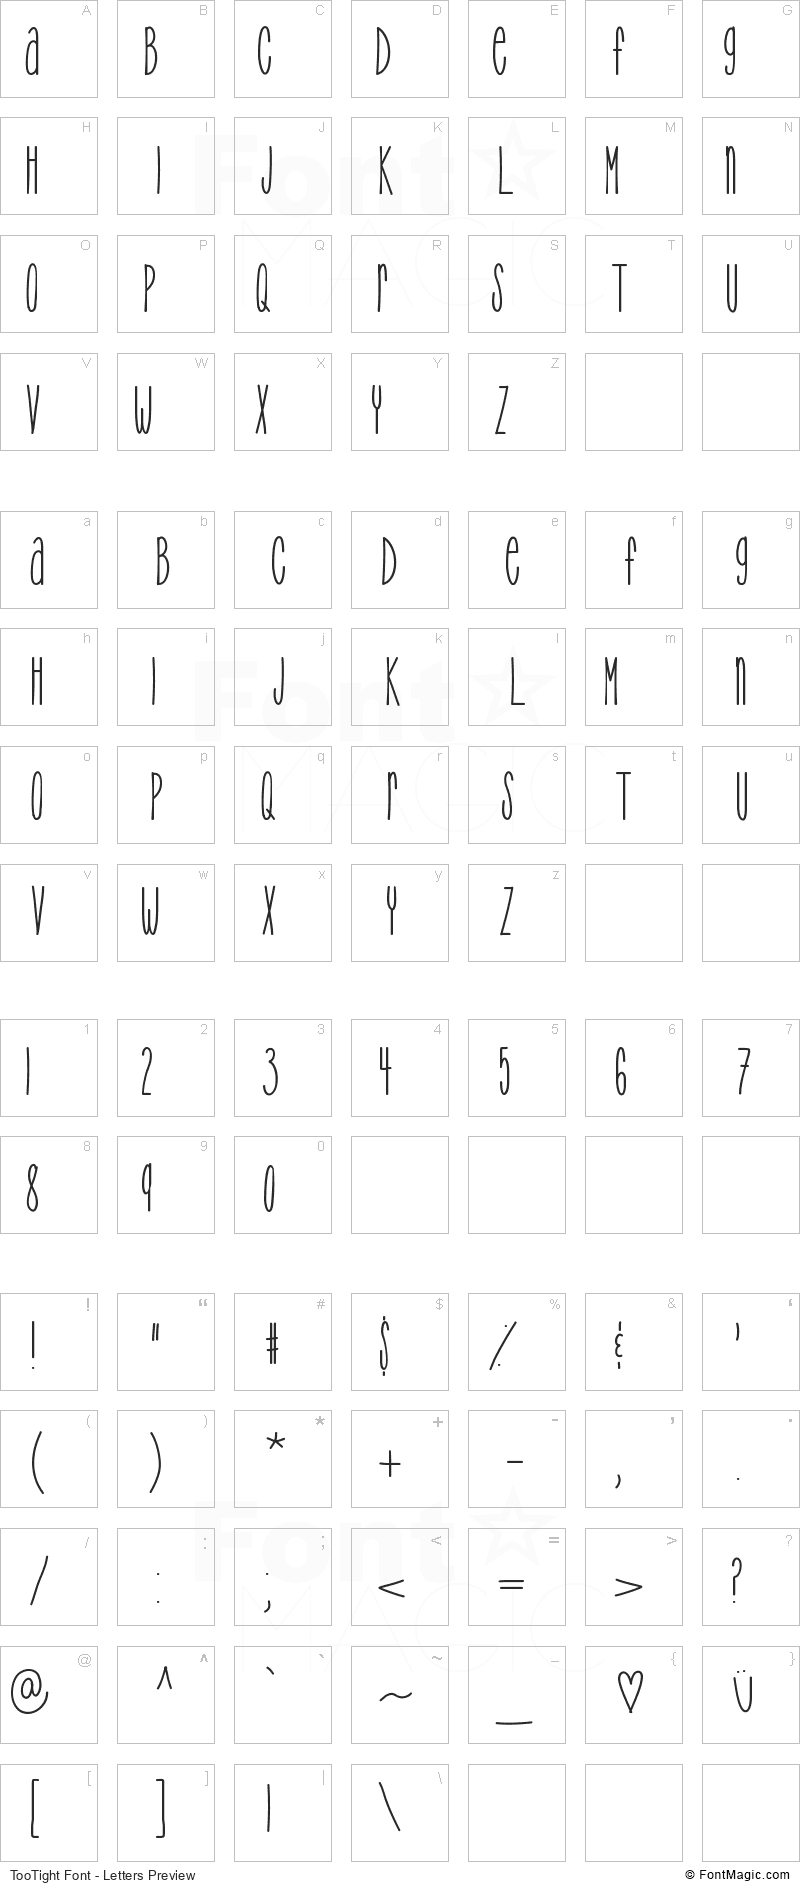 TooTight Font - All Latters Preview Chart